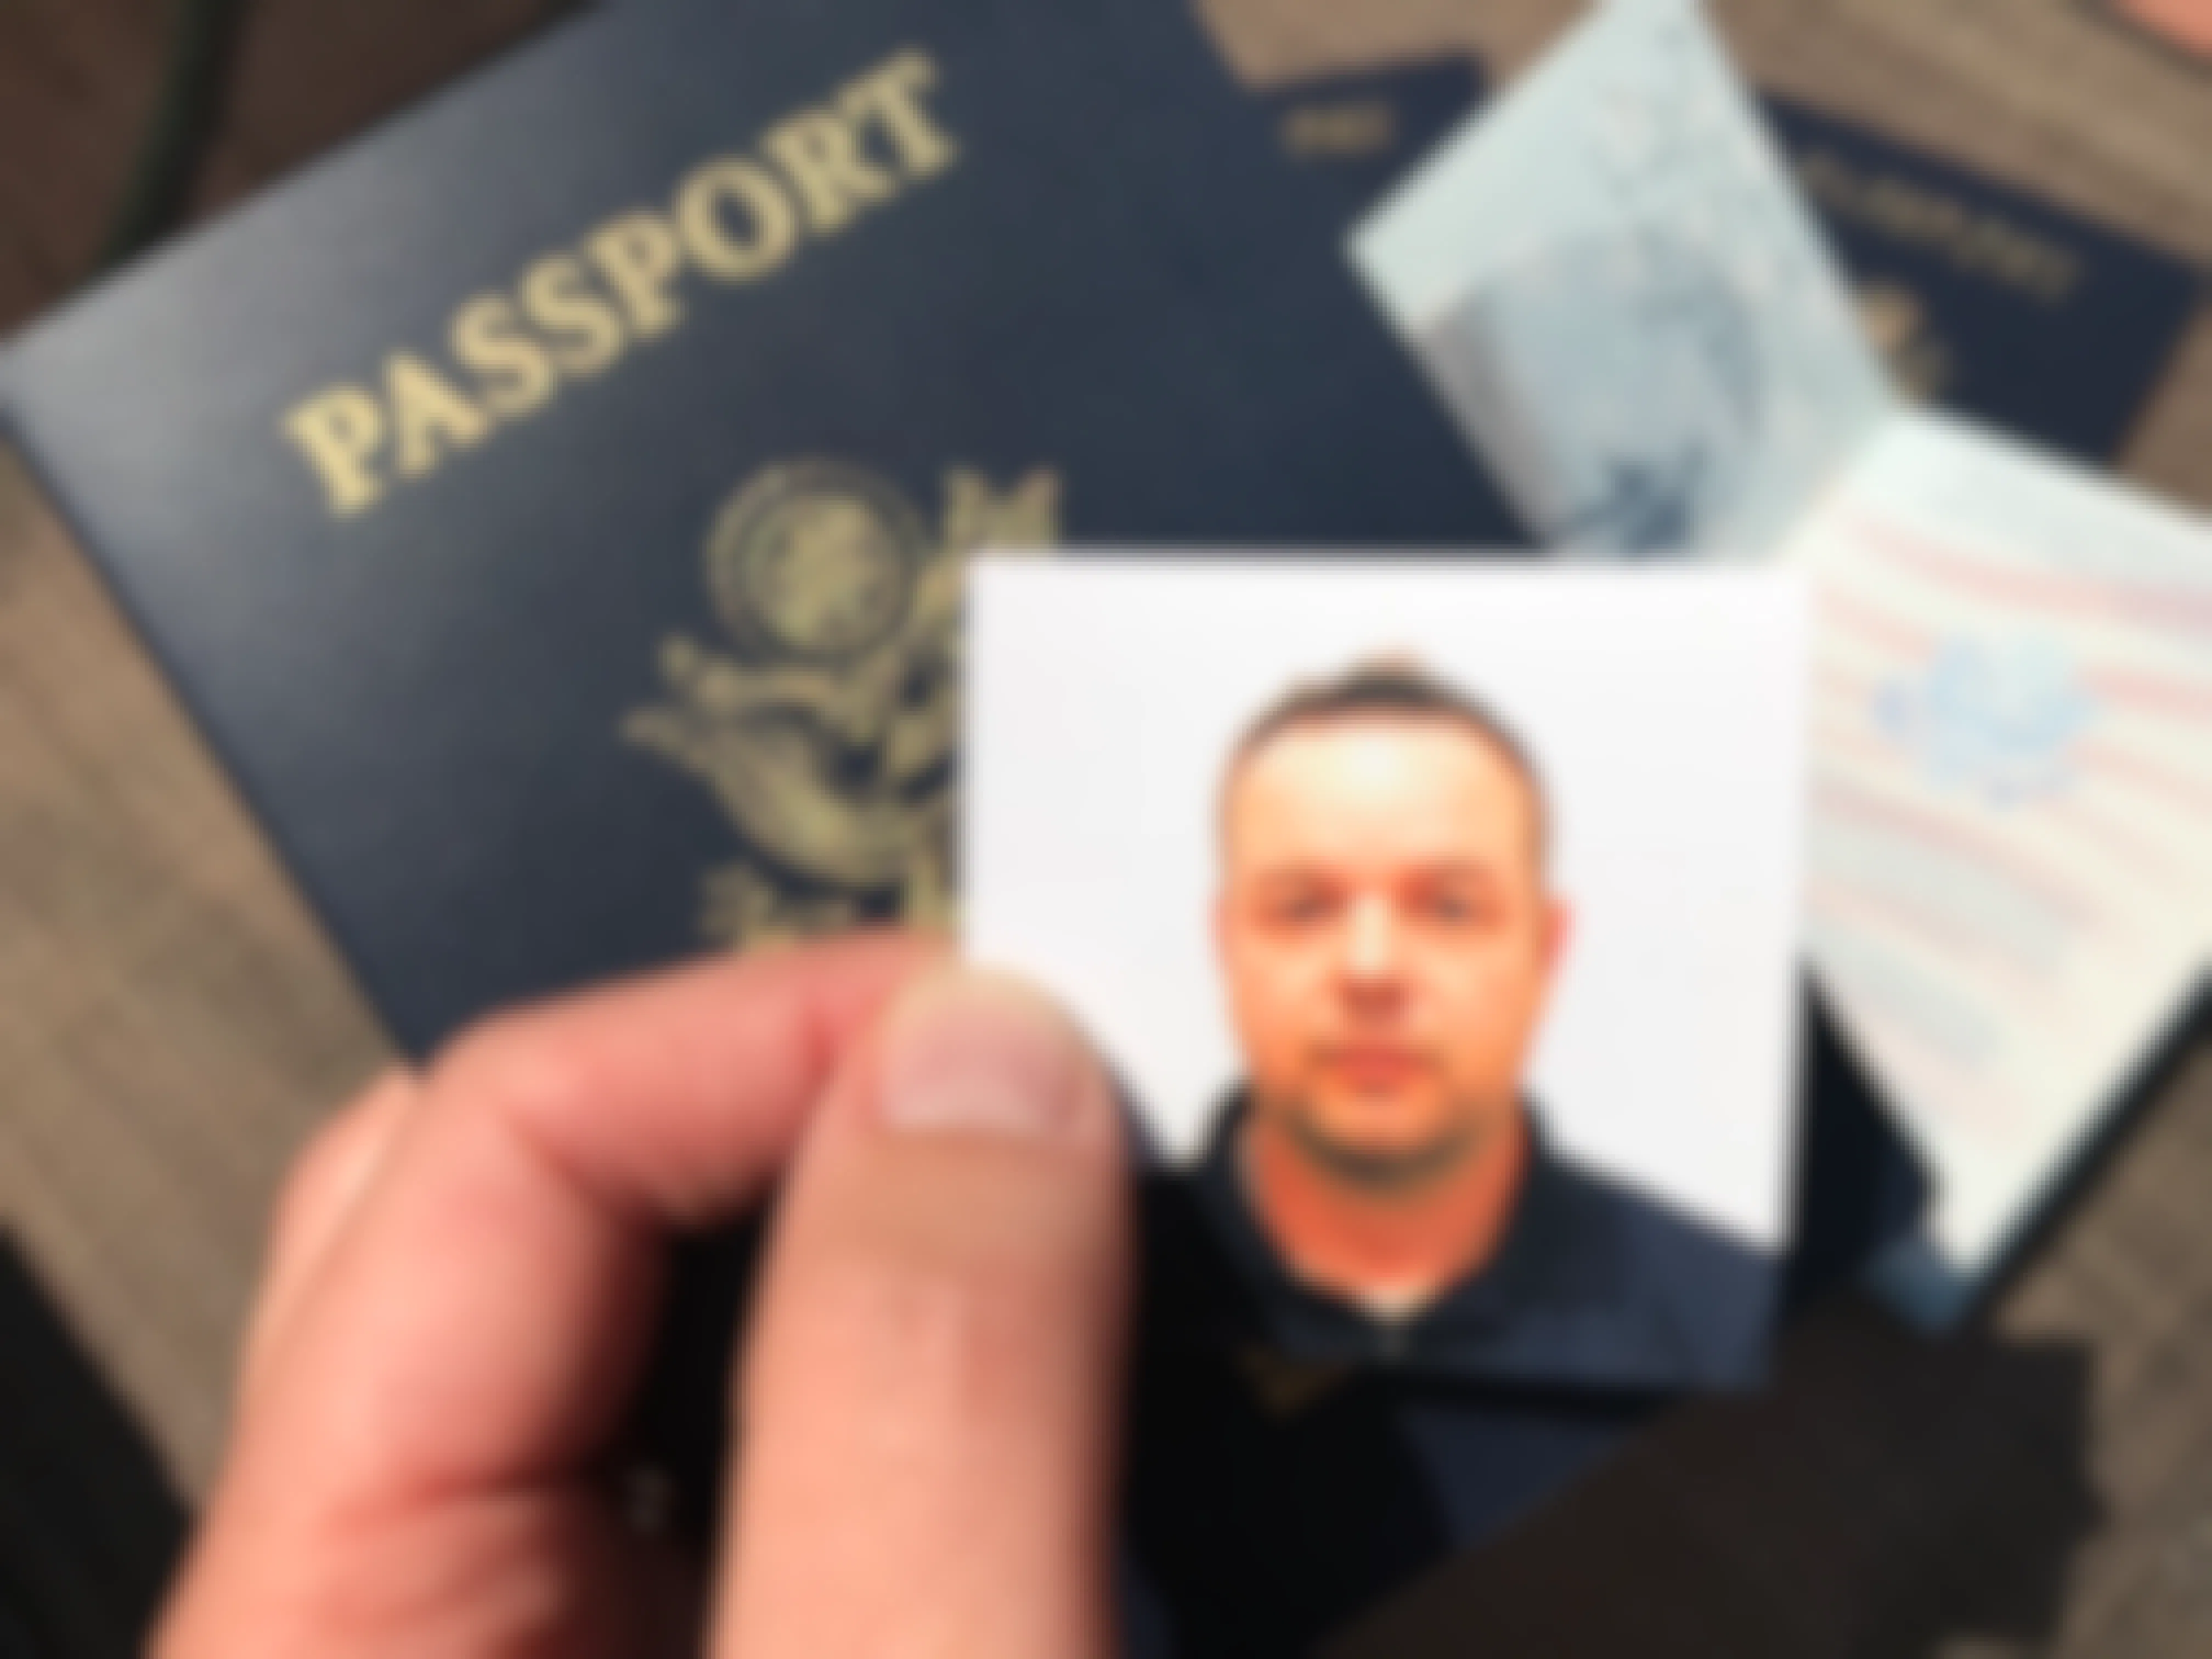 A Passport photo in front of a Passport booklet